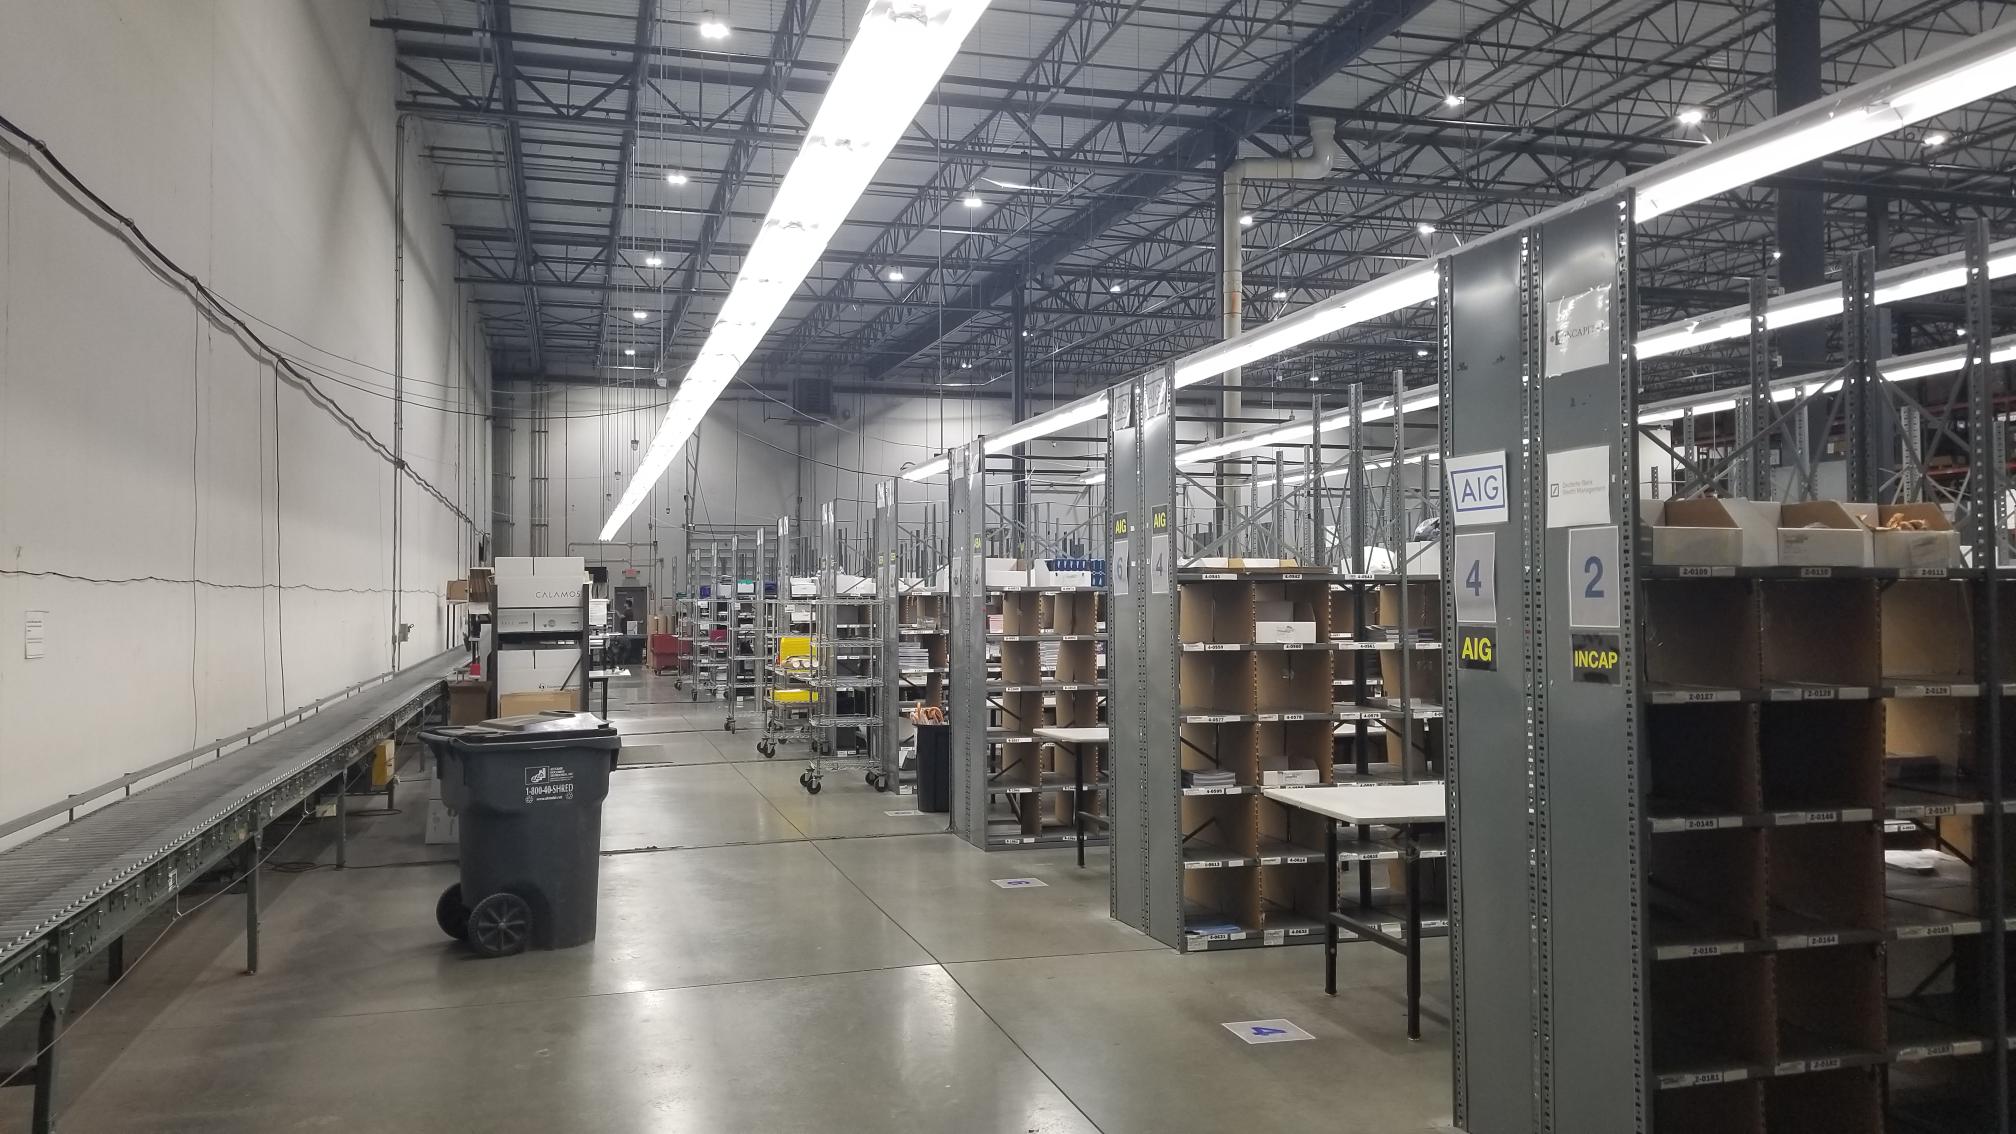 Warehouse Lighting with Shinetoo's Gen2 UFO Highbay and Magnetic Strip